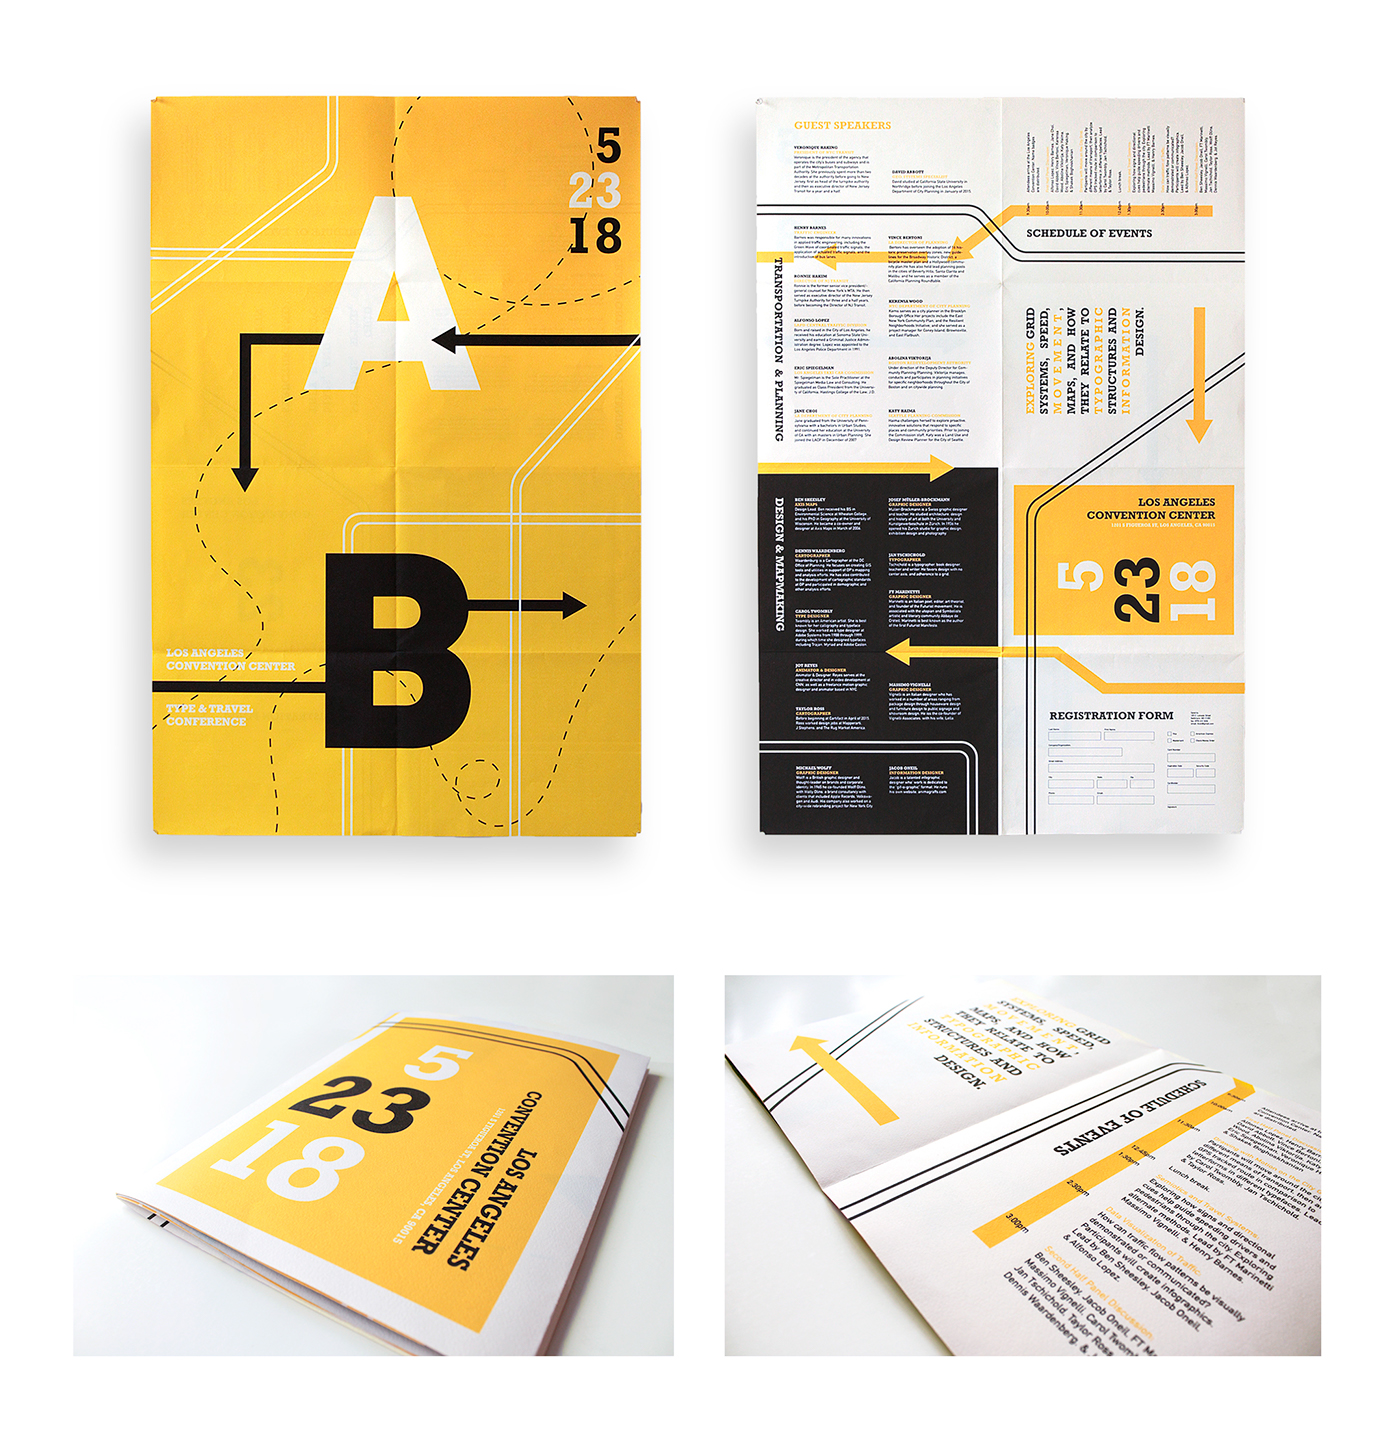 type Travel systems conference maps yellow black identity branding 